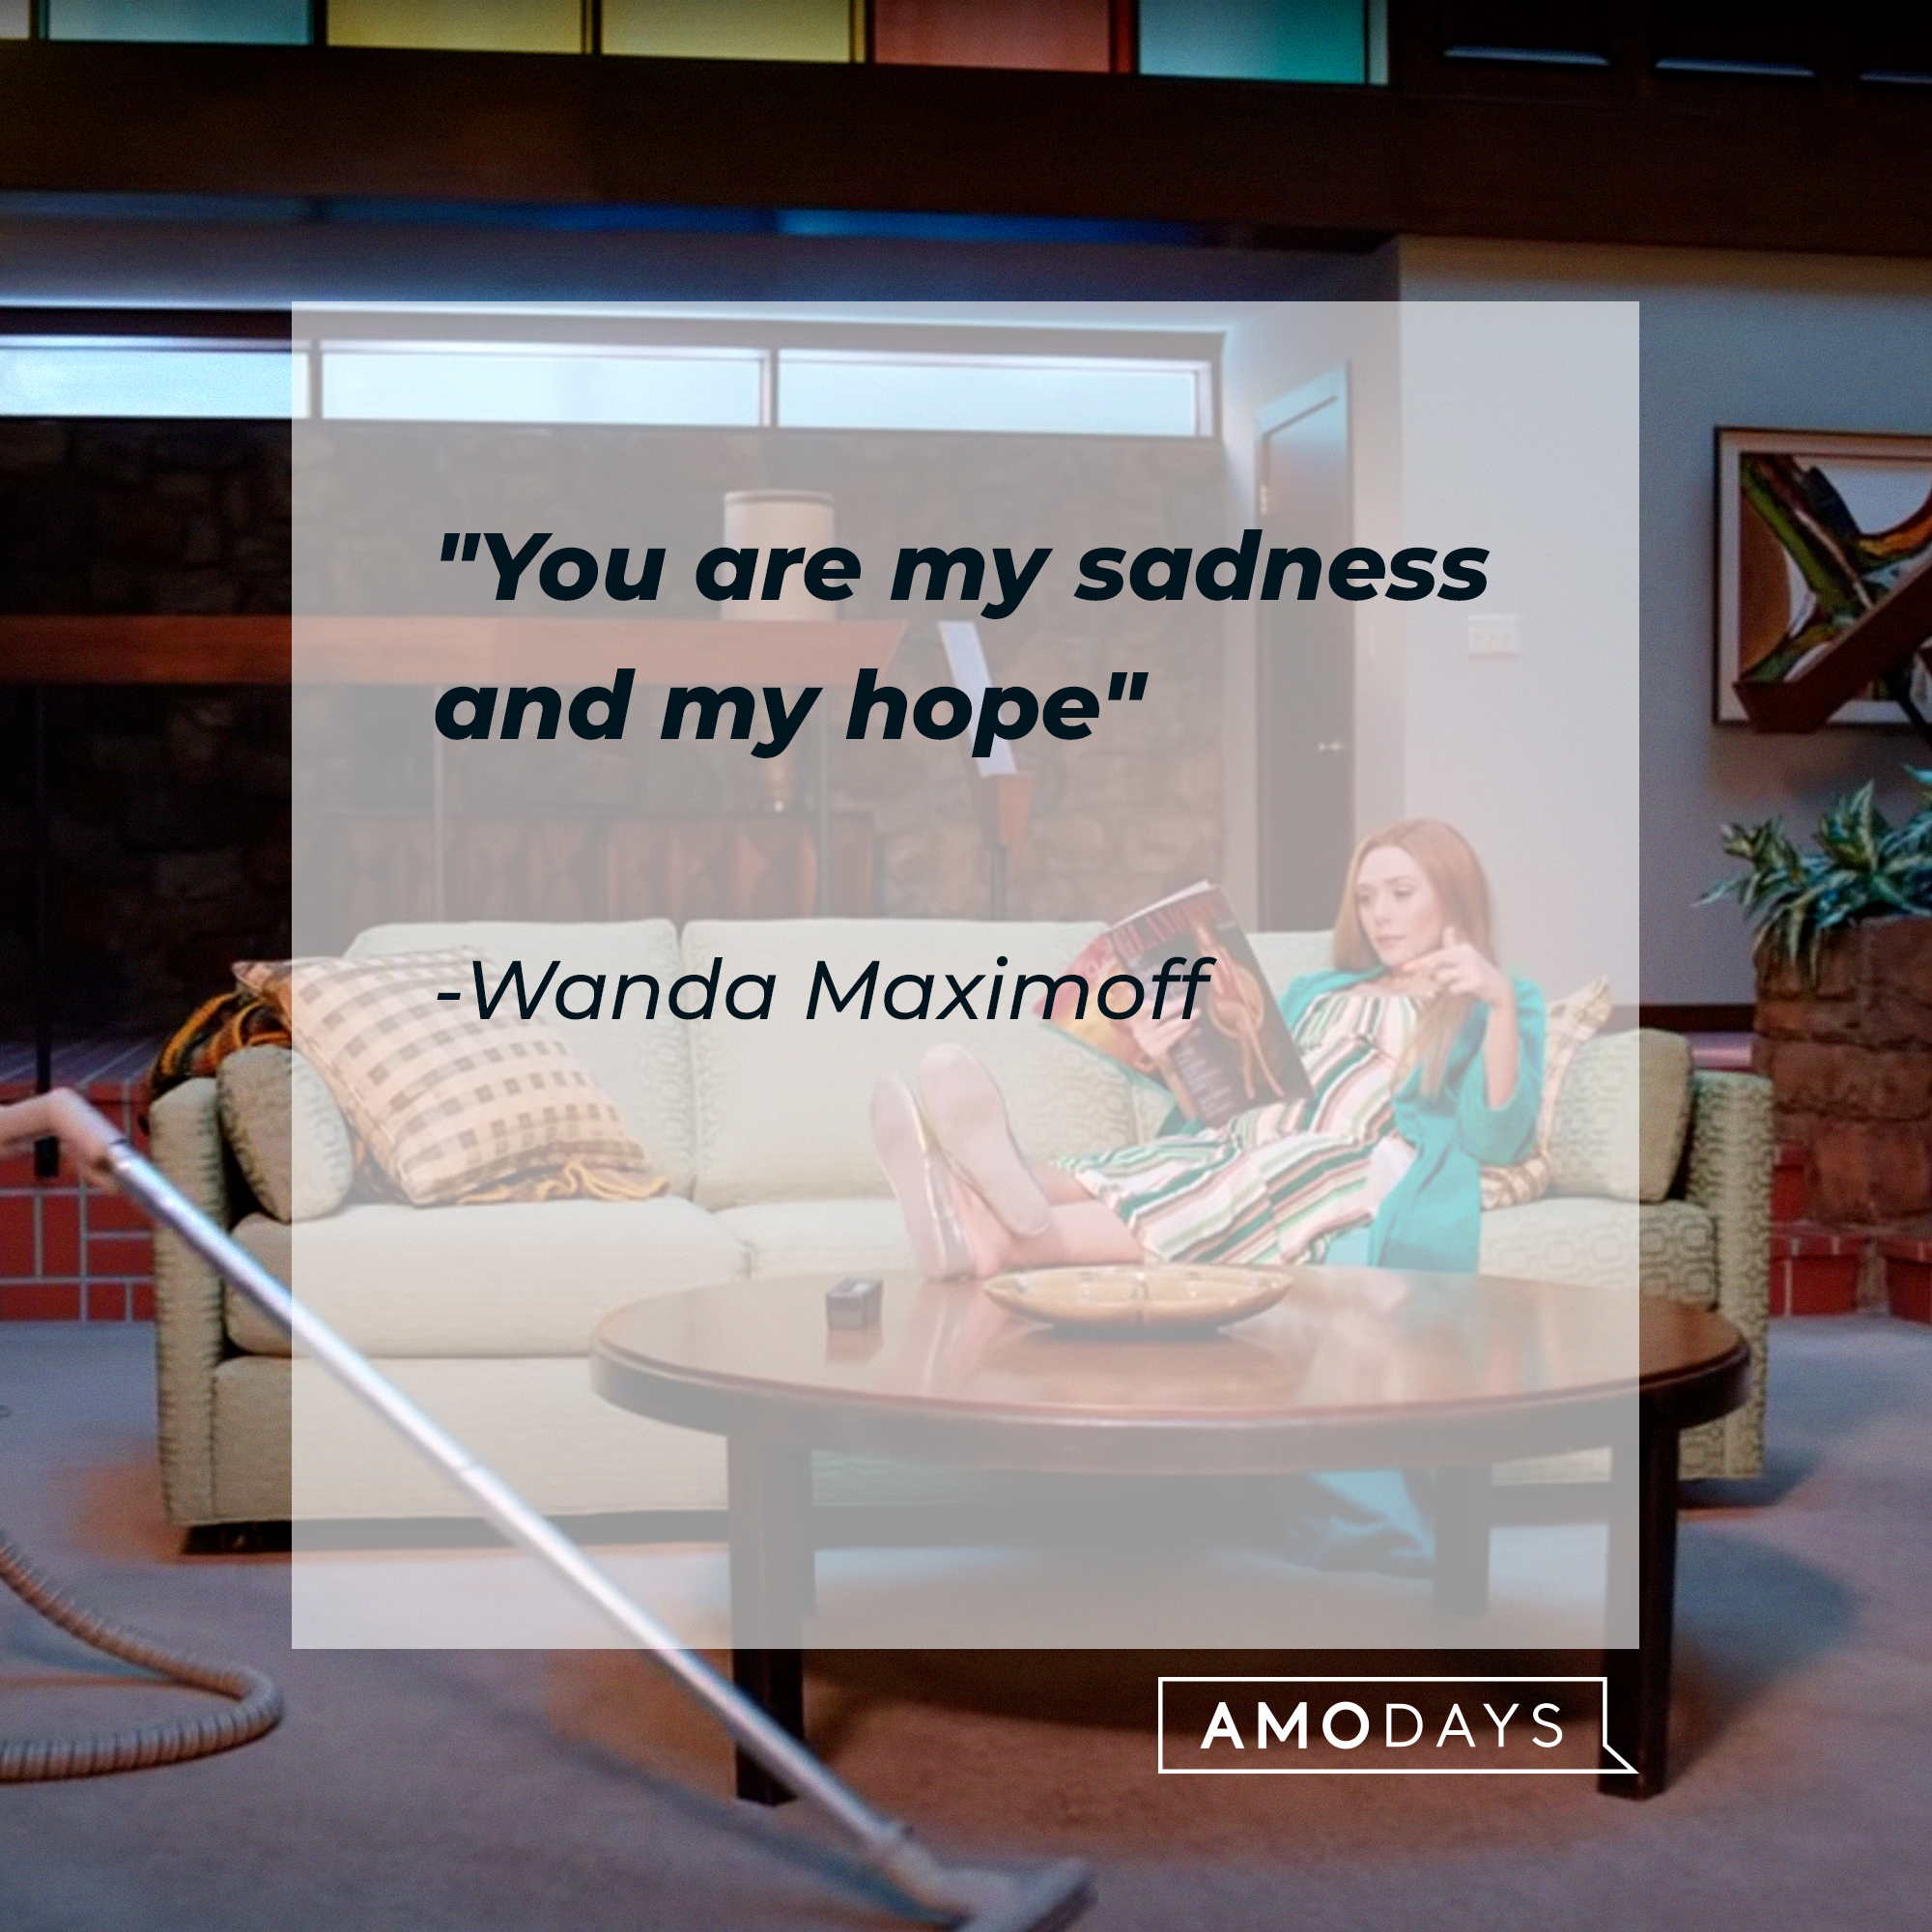 Wanda Maximoff's quote: "You are my sadness and my hope." | Source: Facebook/wandavisionofficial